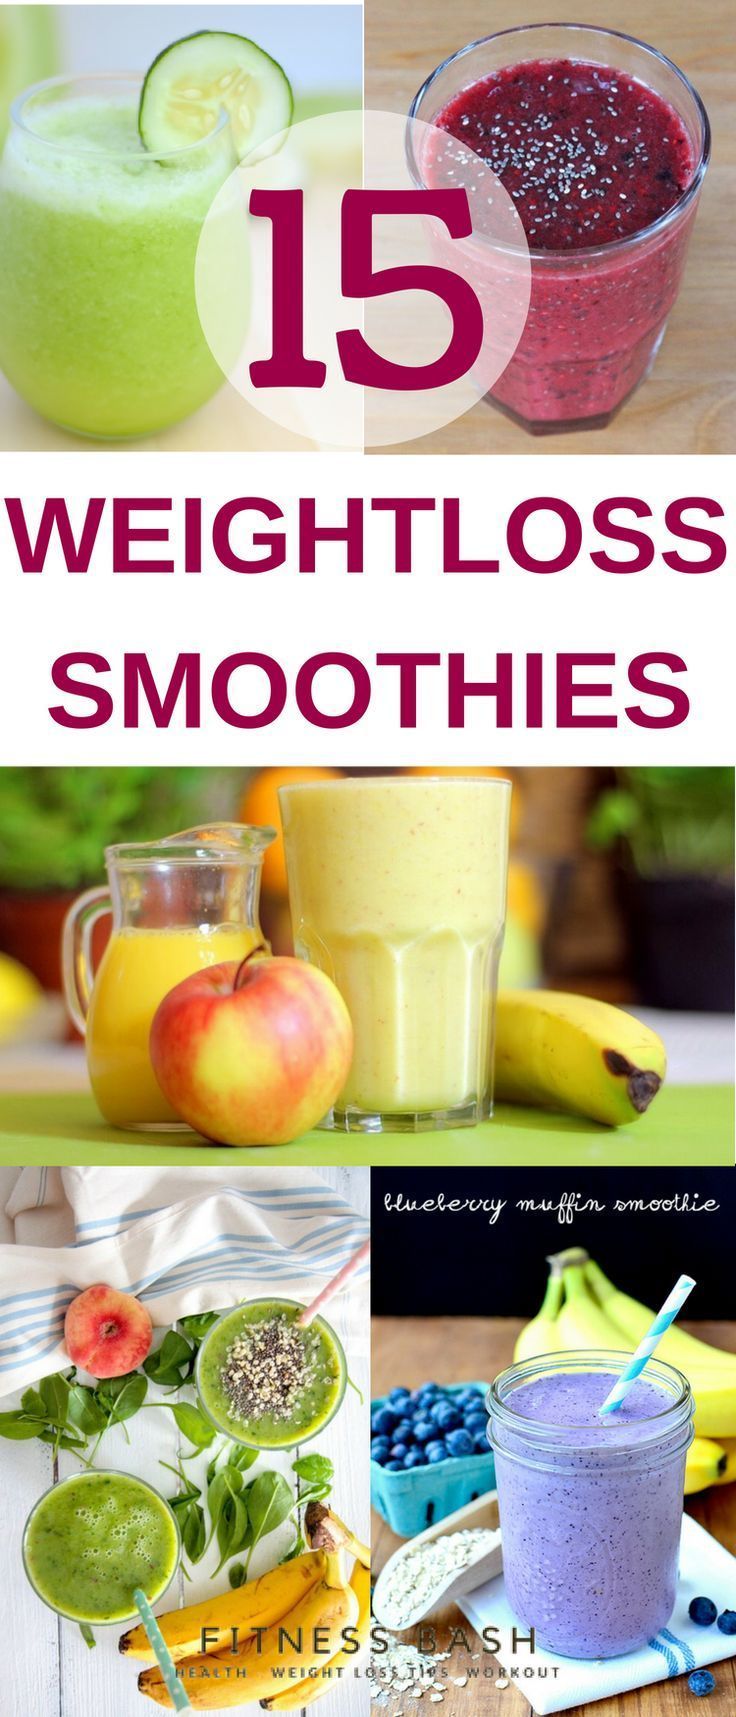 12 healthy recipes Fast breakfast smoothies ideas